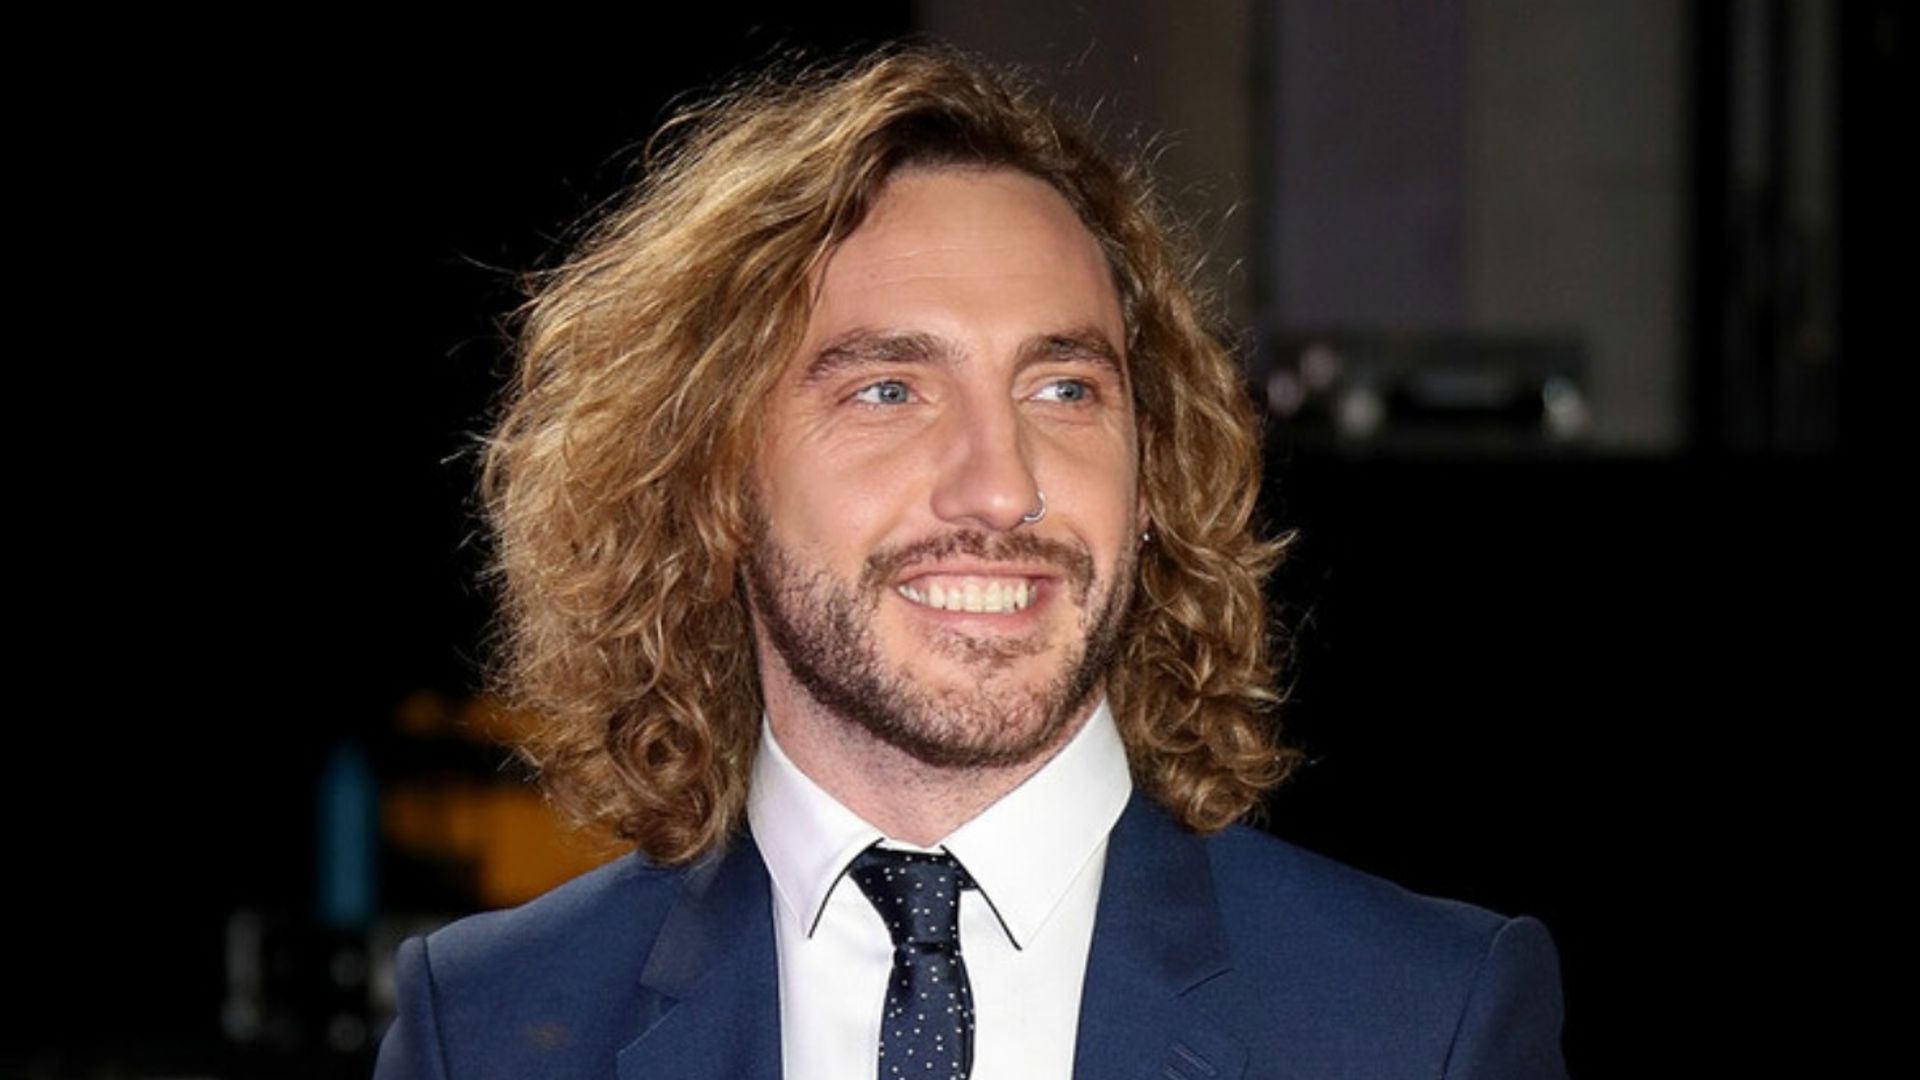 I'm A Celeb's Seann Walsh: Everything you need to know - from early career to Strictly kiss scandal